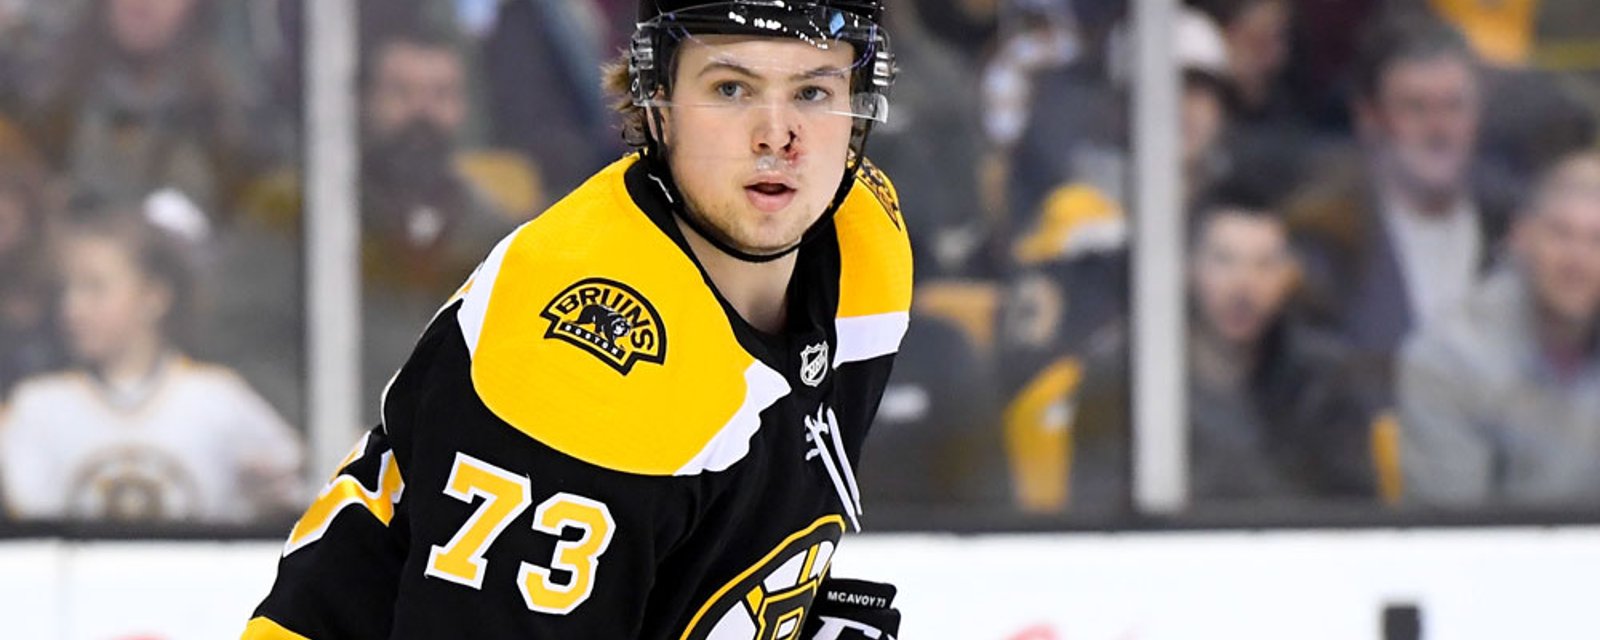 BREAKING: Charlie McAvoy has just suffered an injury